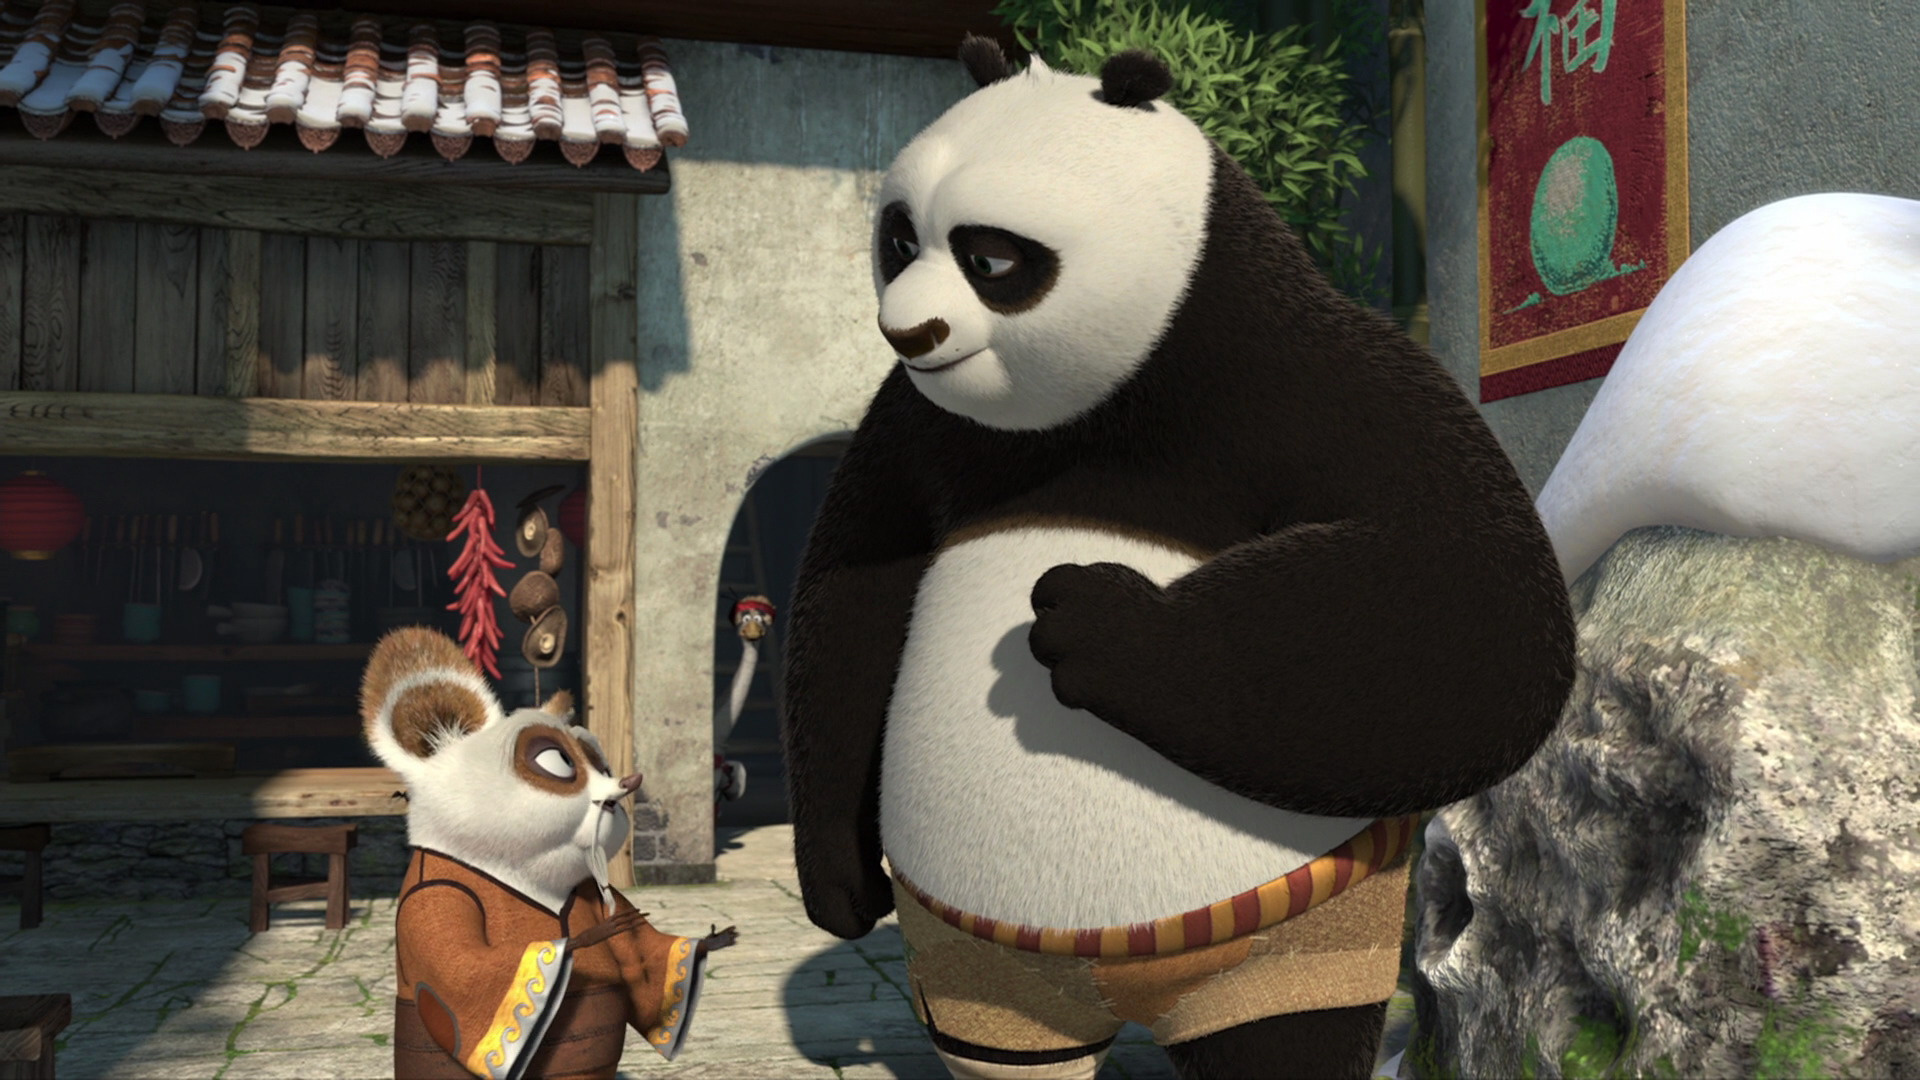 Master Shifu: Kung Fu Panda, Raised by Oogway from the age of twelve. 1920x1080 Full HD Wallpaper.